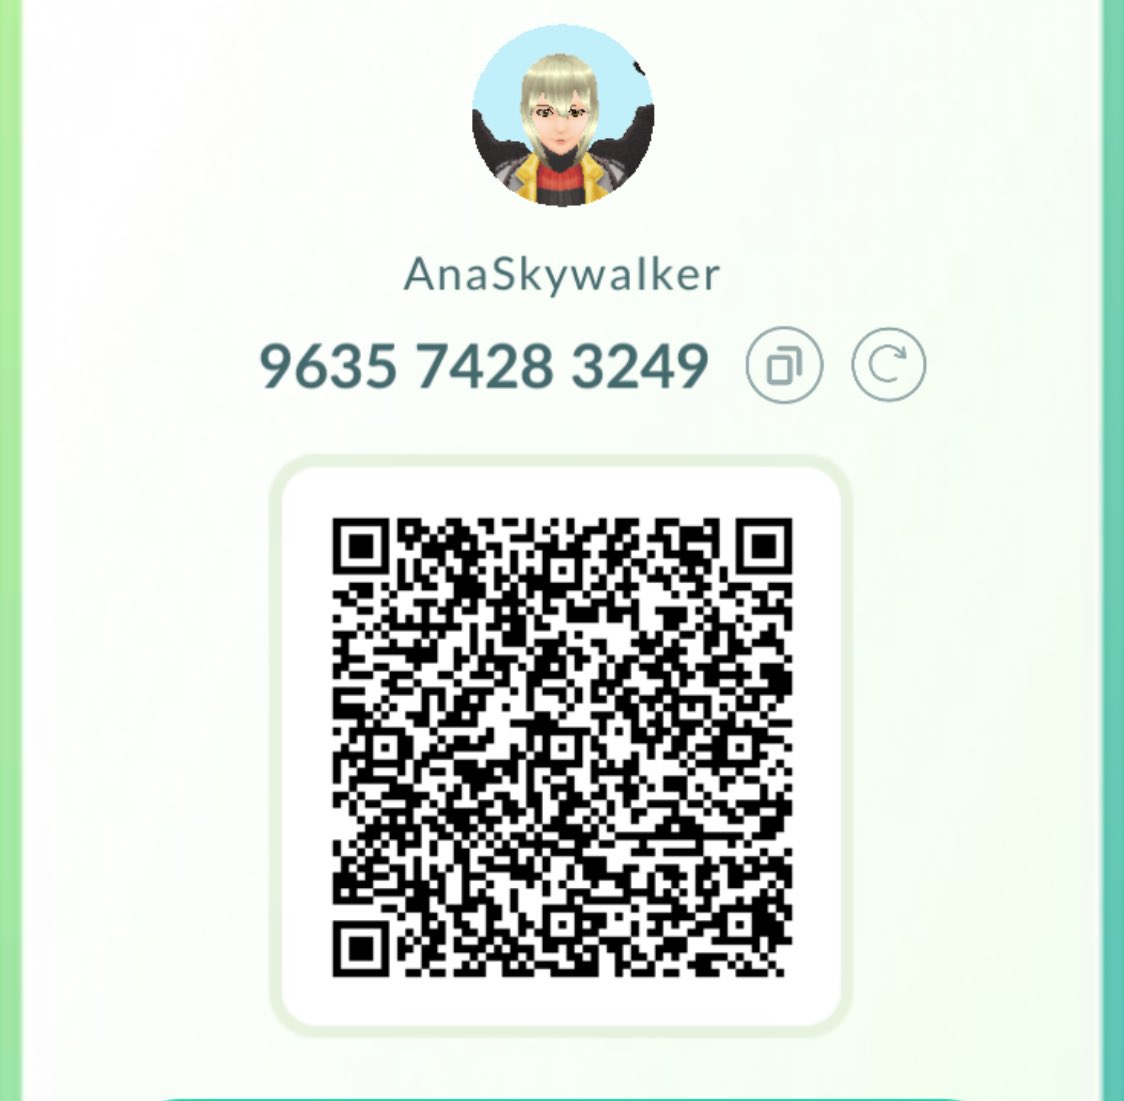 Looking for some new friends

- Daily gift openers 🎁
- Ready for raids when I'm online🟢

IGN: 9635 7428 3249

please add me, tks 

#PokemonGO #PokemonGoFriendCodes #PokemonGoFriends #PokemonGOraid